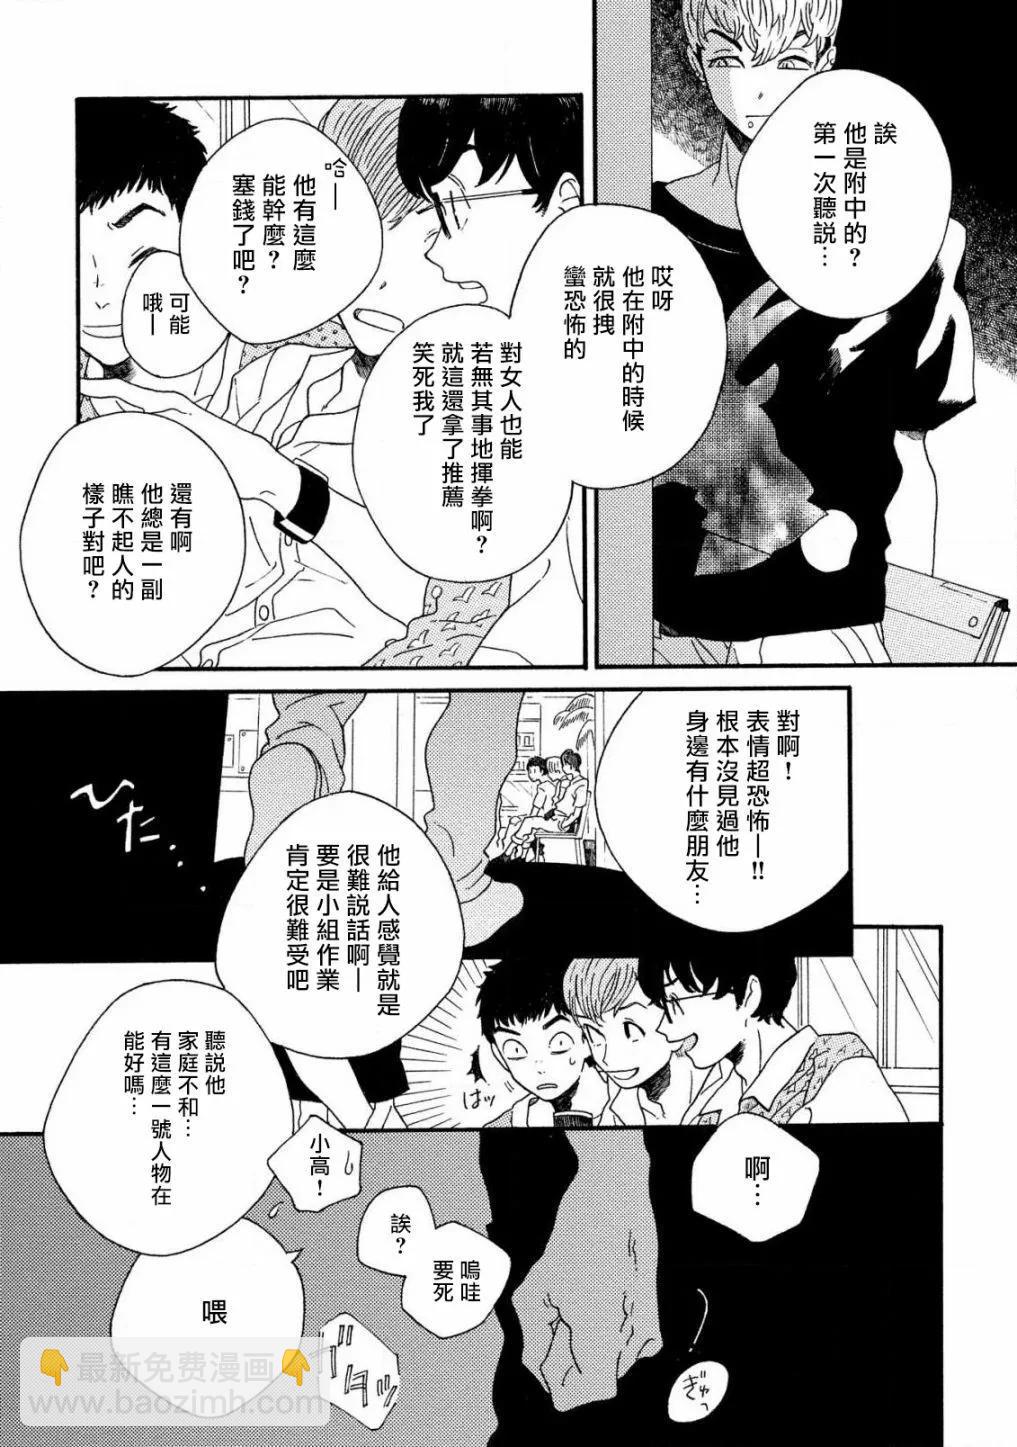 Sneaky Red - 第02話 - 5